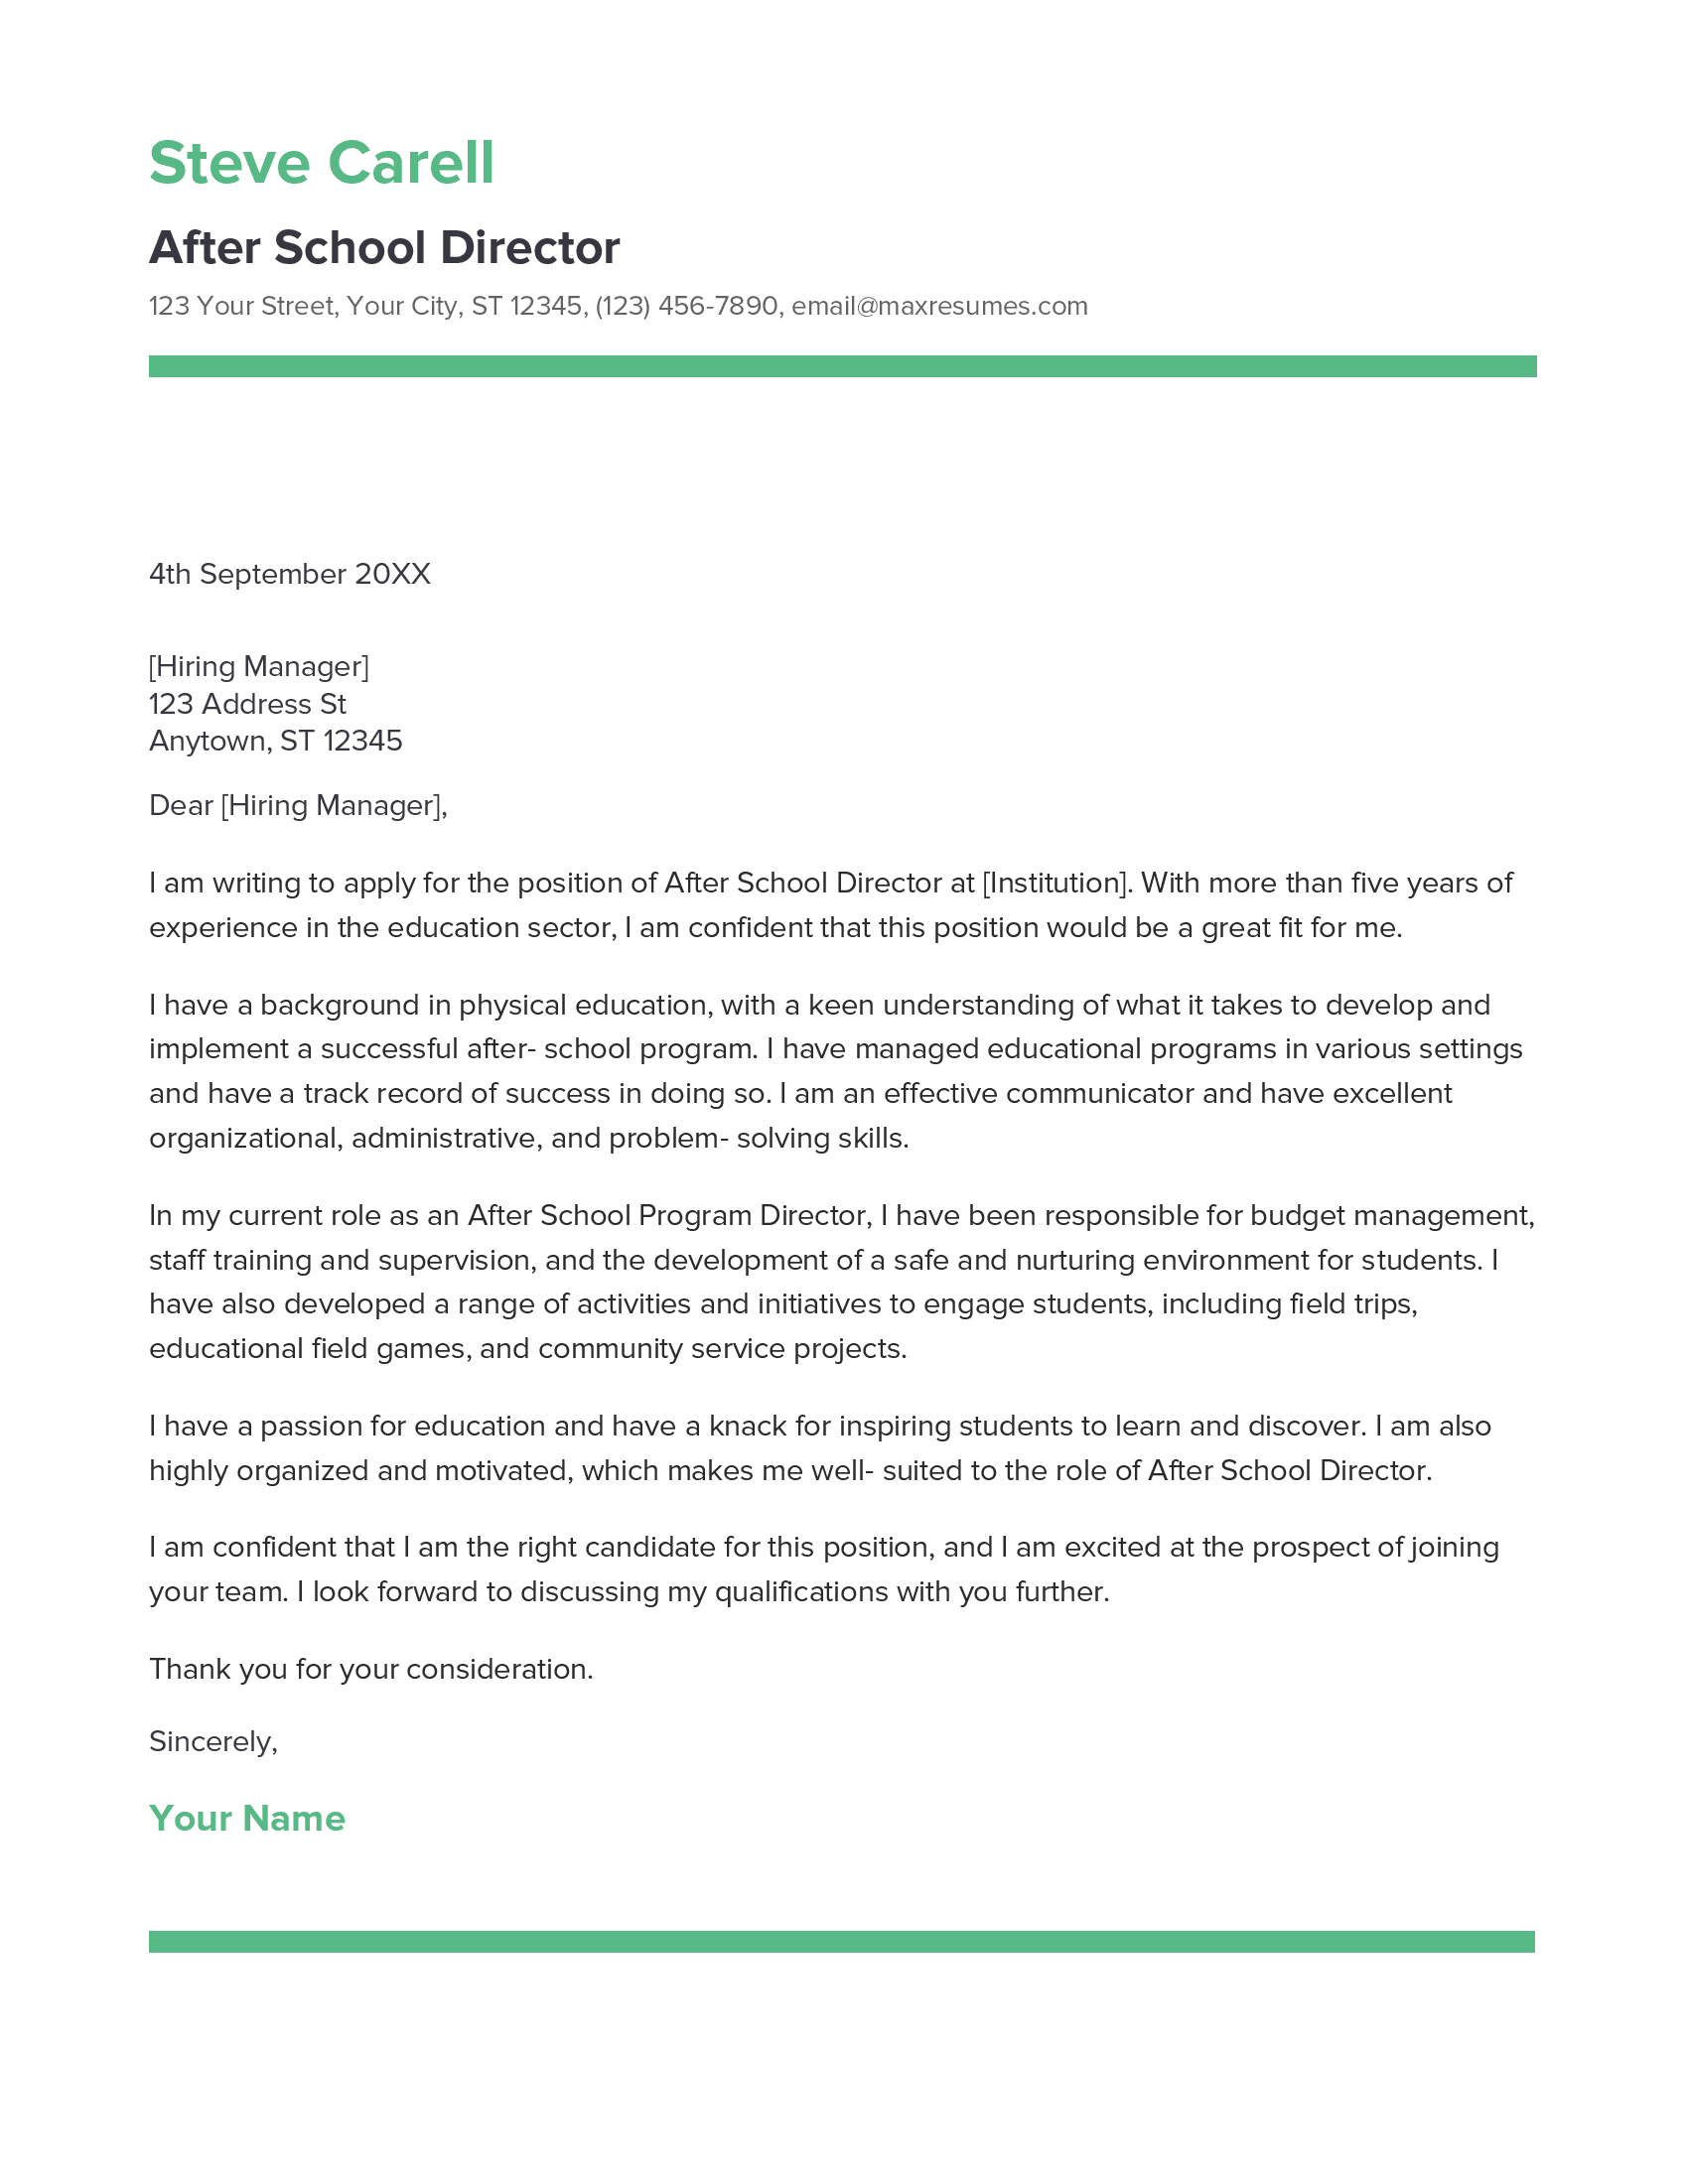 After School Director Cover Letter Example